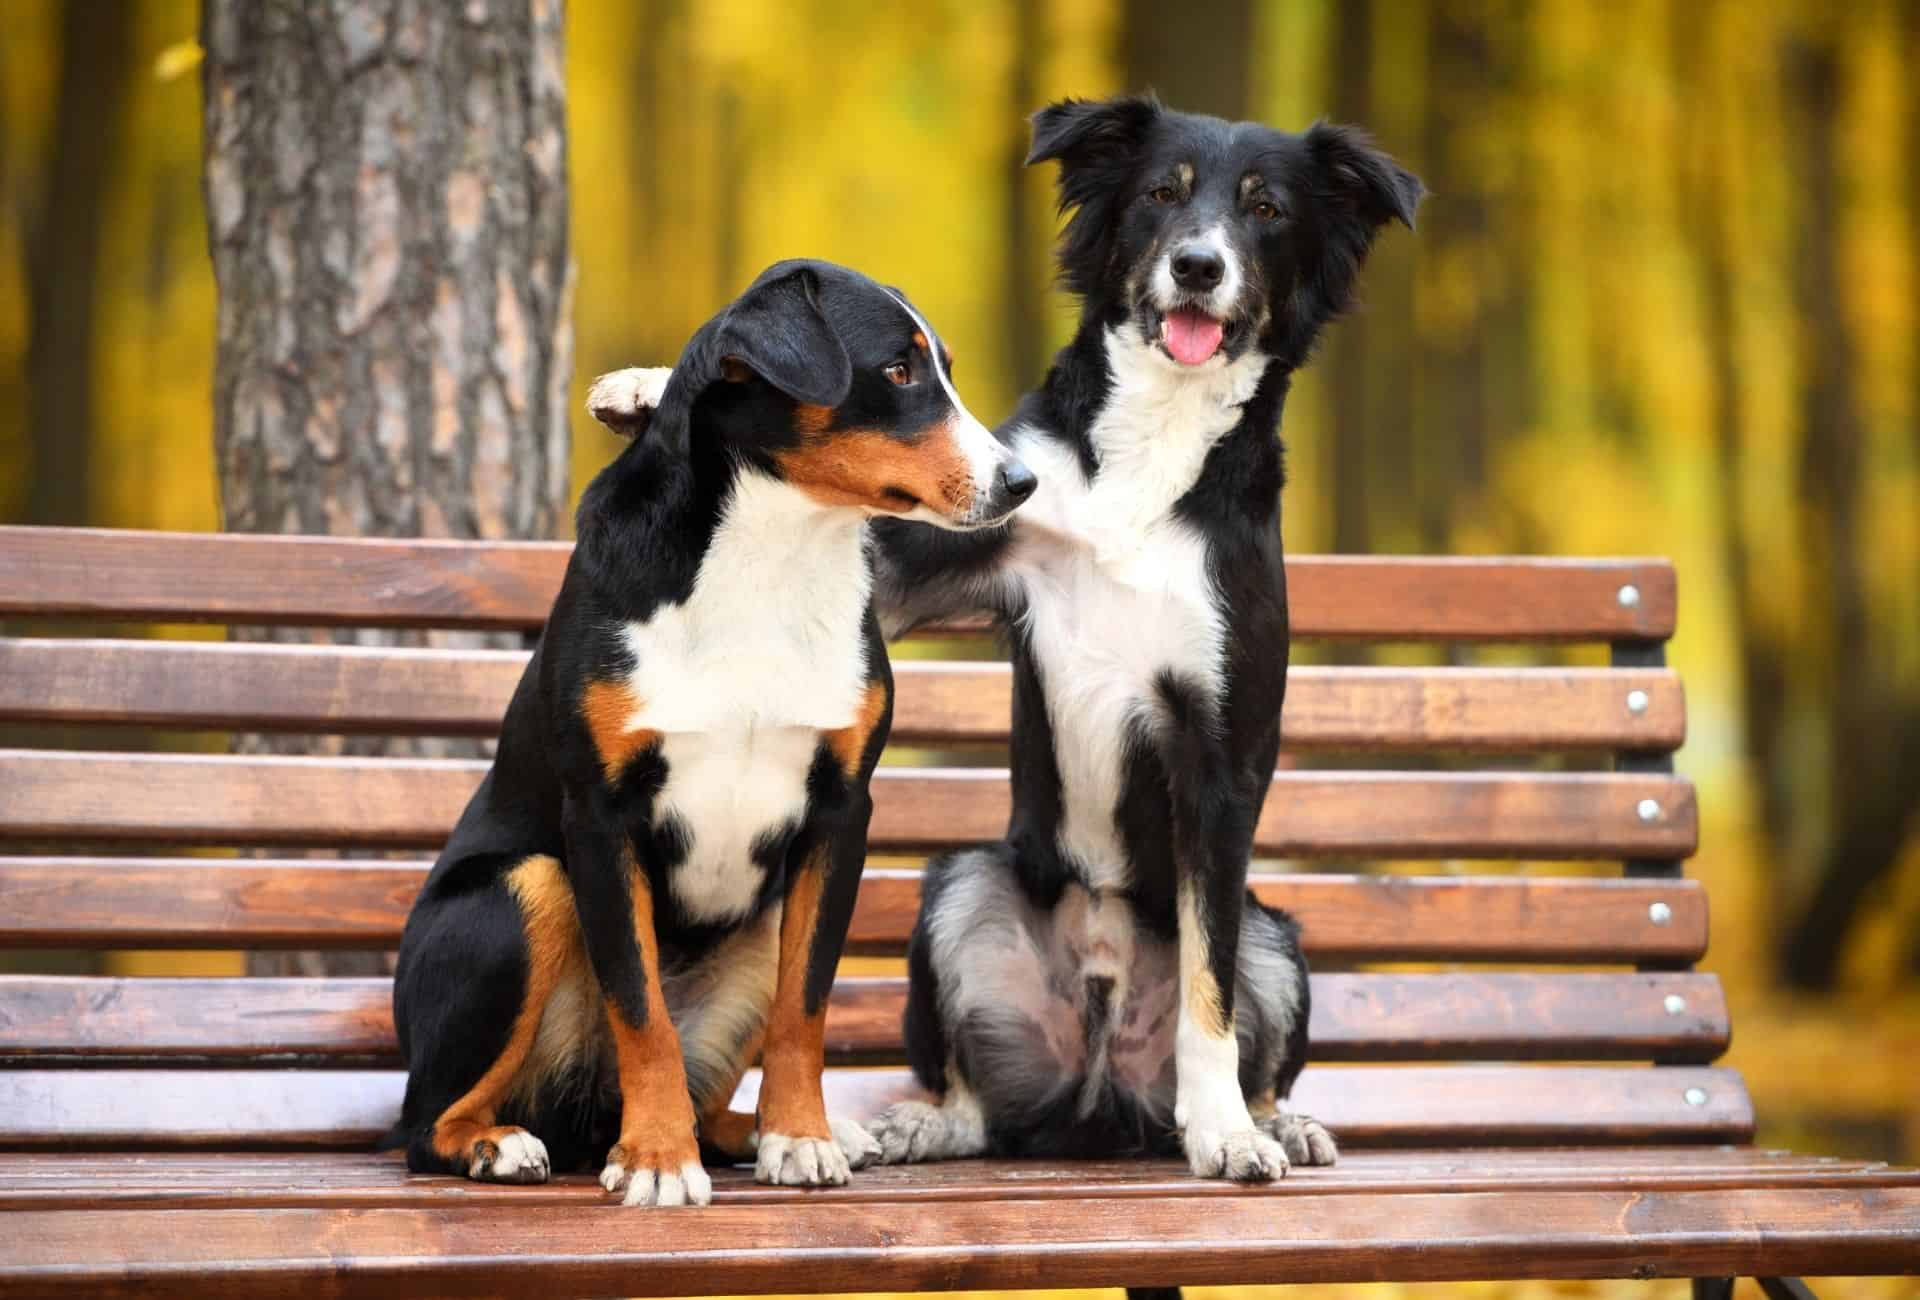 Two dogs sit on a bench, one dog places a paw on the other dog's back.